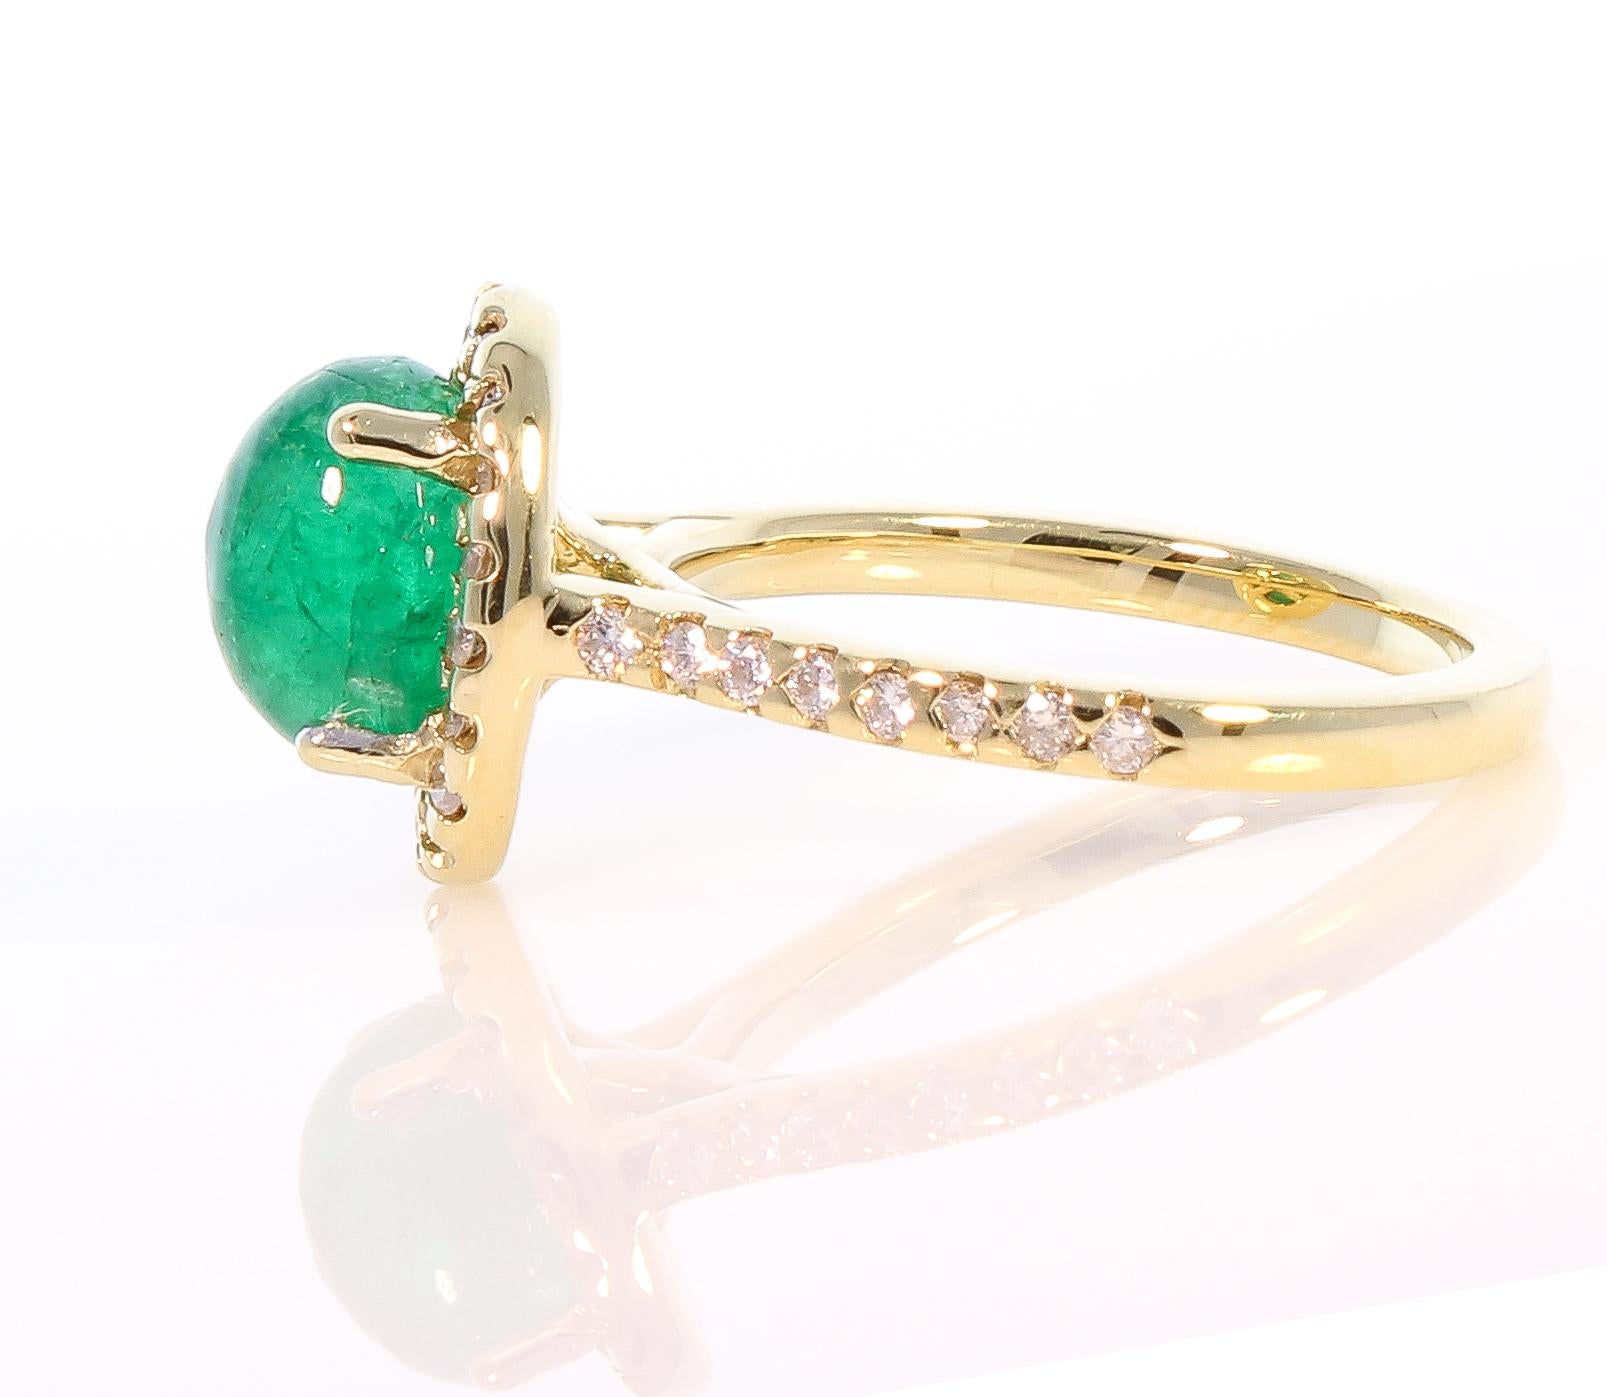 Women's 2.31 Carat Cabochon Emerald and Diamond Cocktail Ring in 18 Karat Yellow Gold